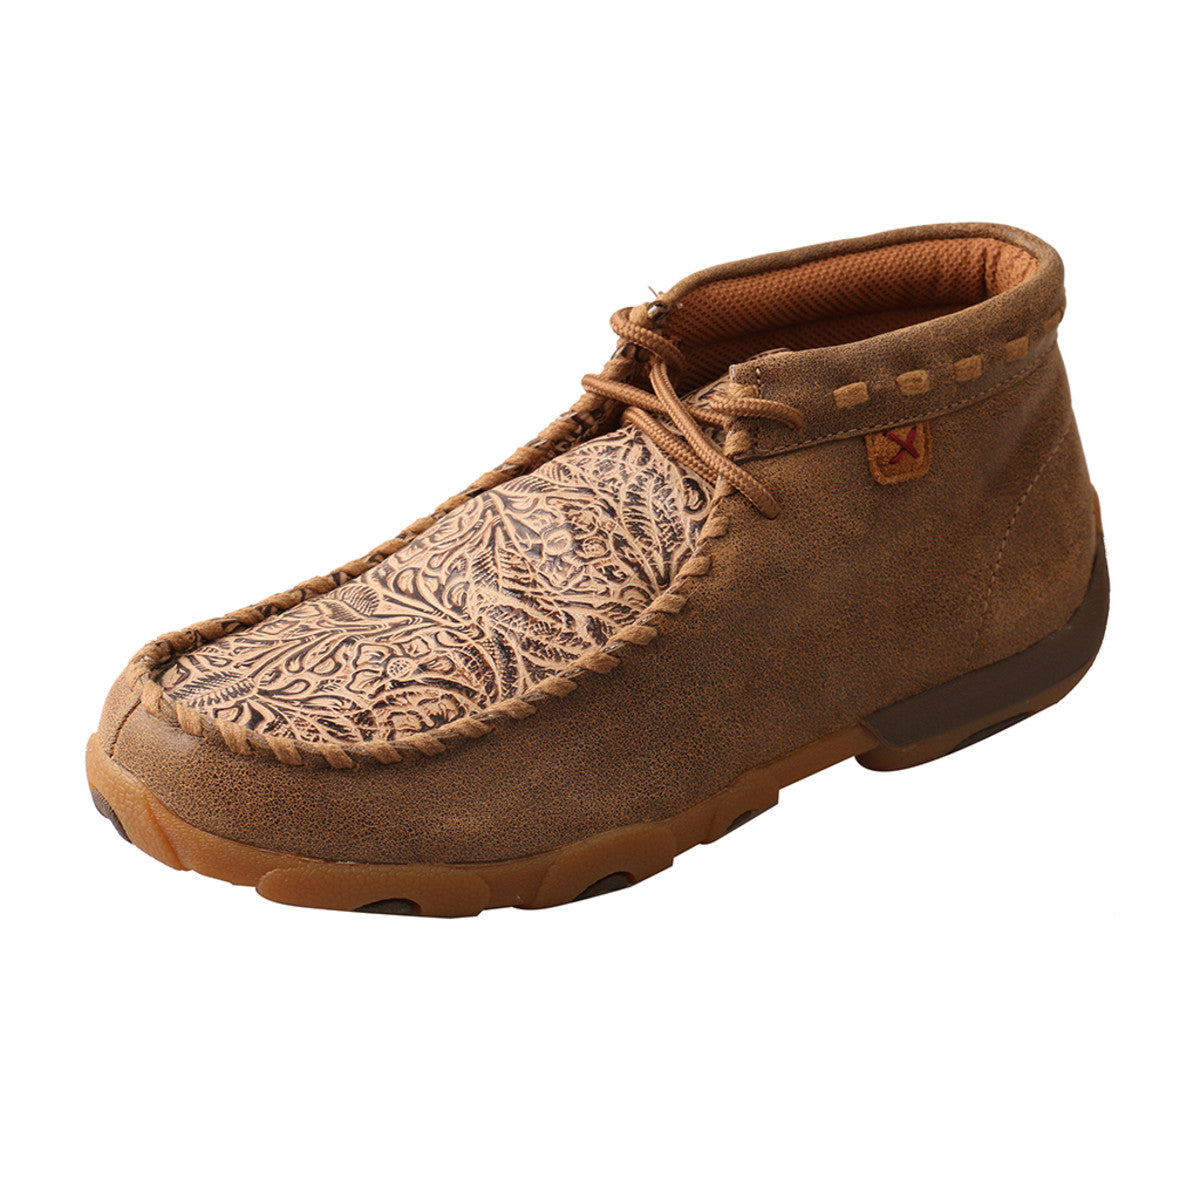 Women's Twisted X Chukka Driving Moccasins Shoe in Bomber & Nude Print from the side view